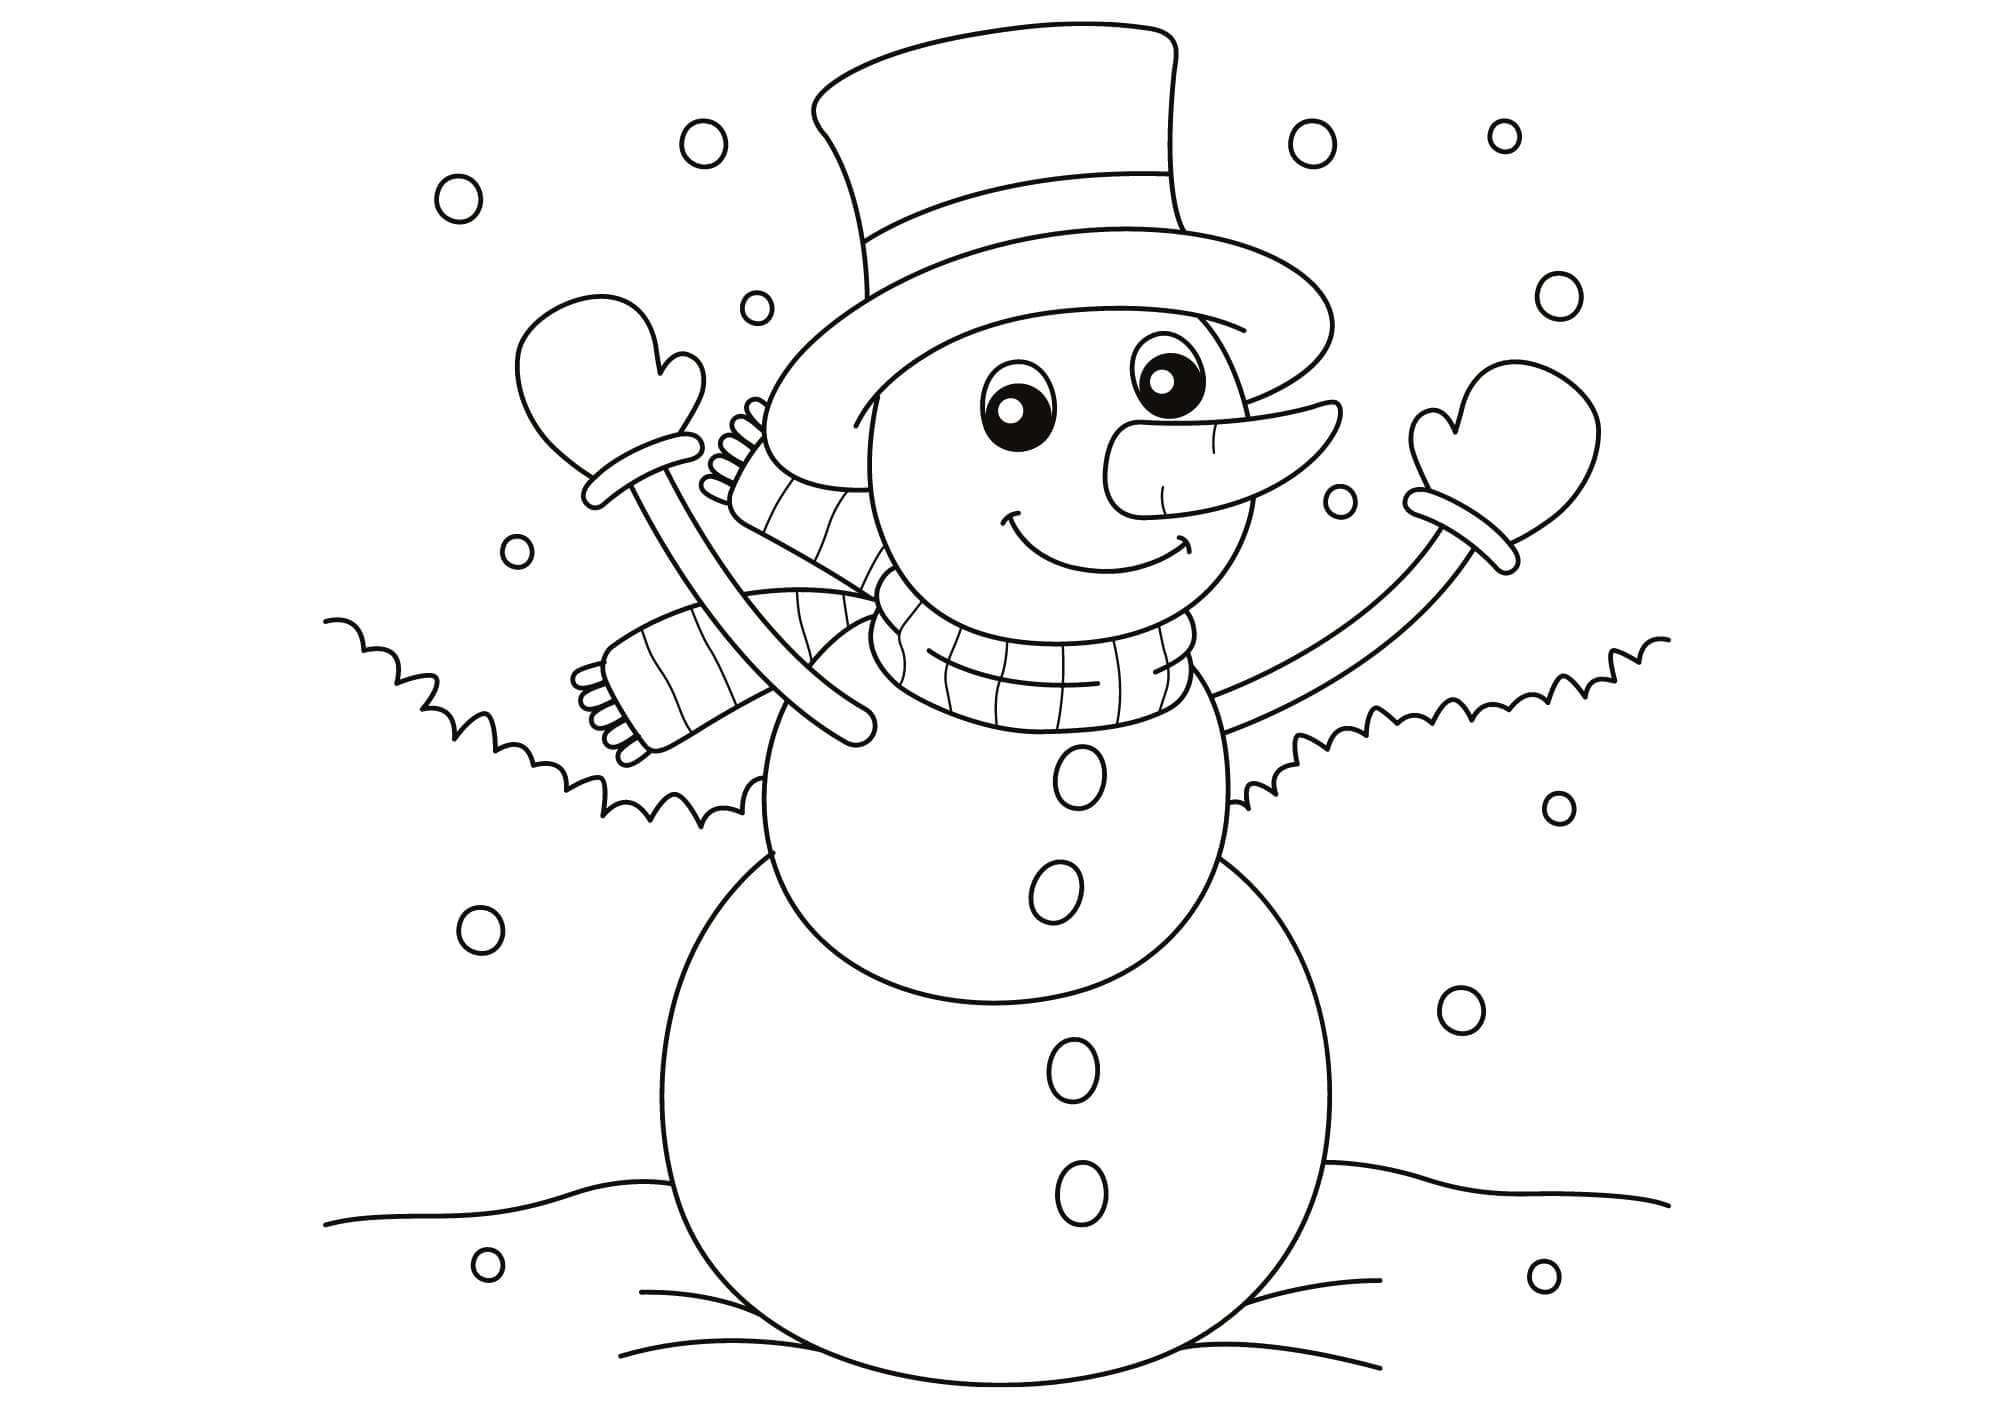 Coloring sheets of Snowman (free + printable)